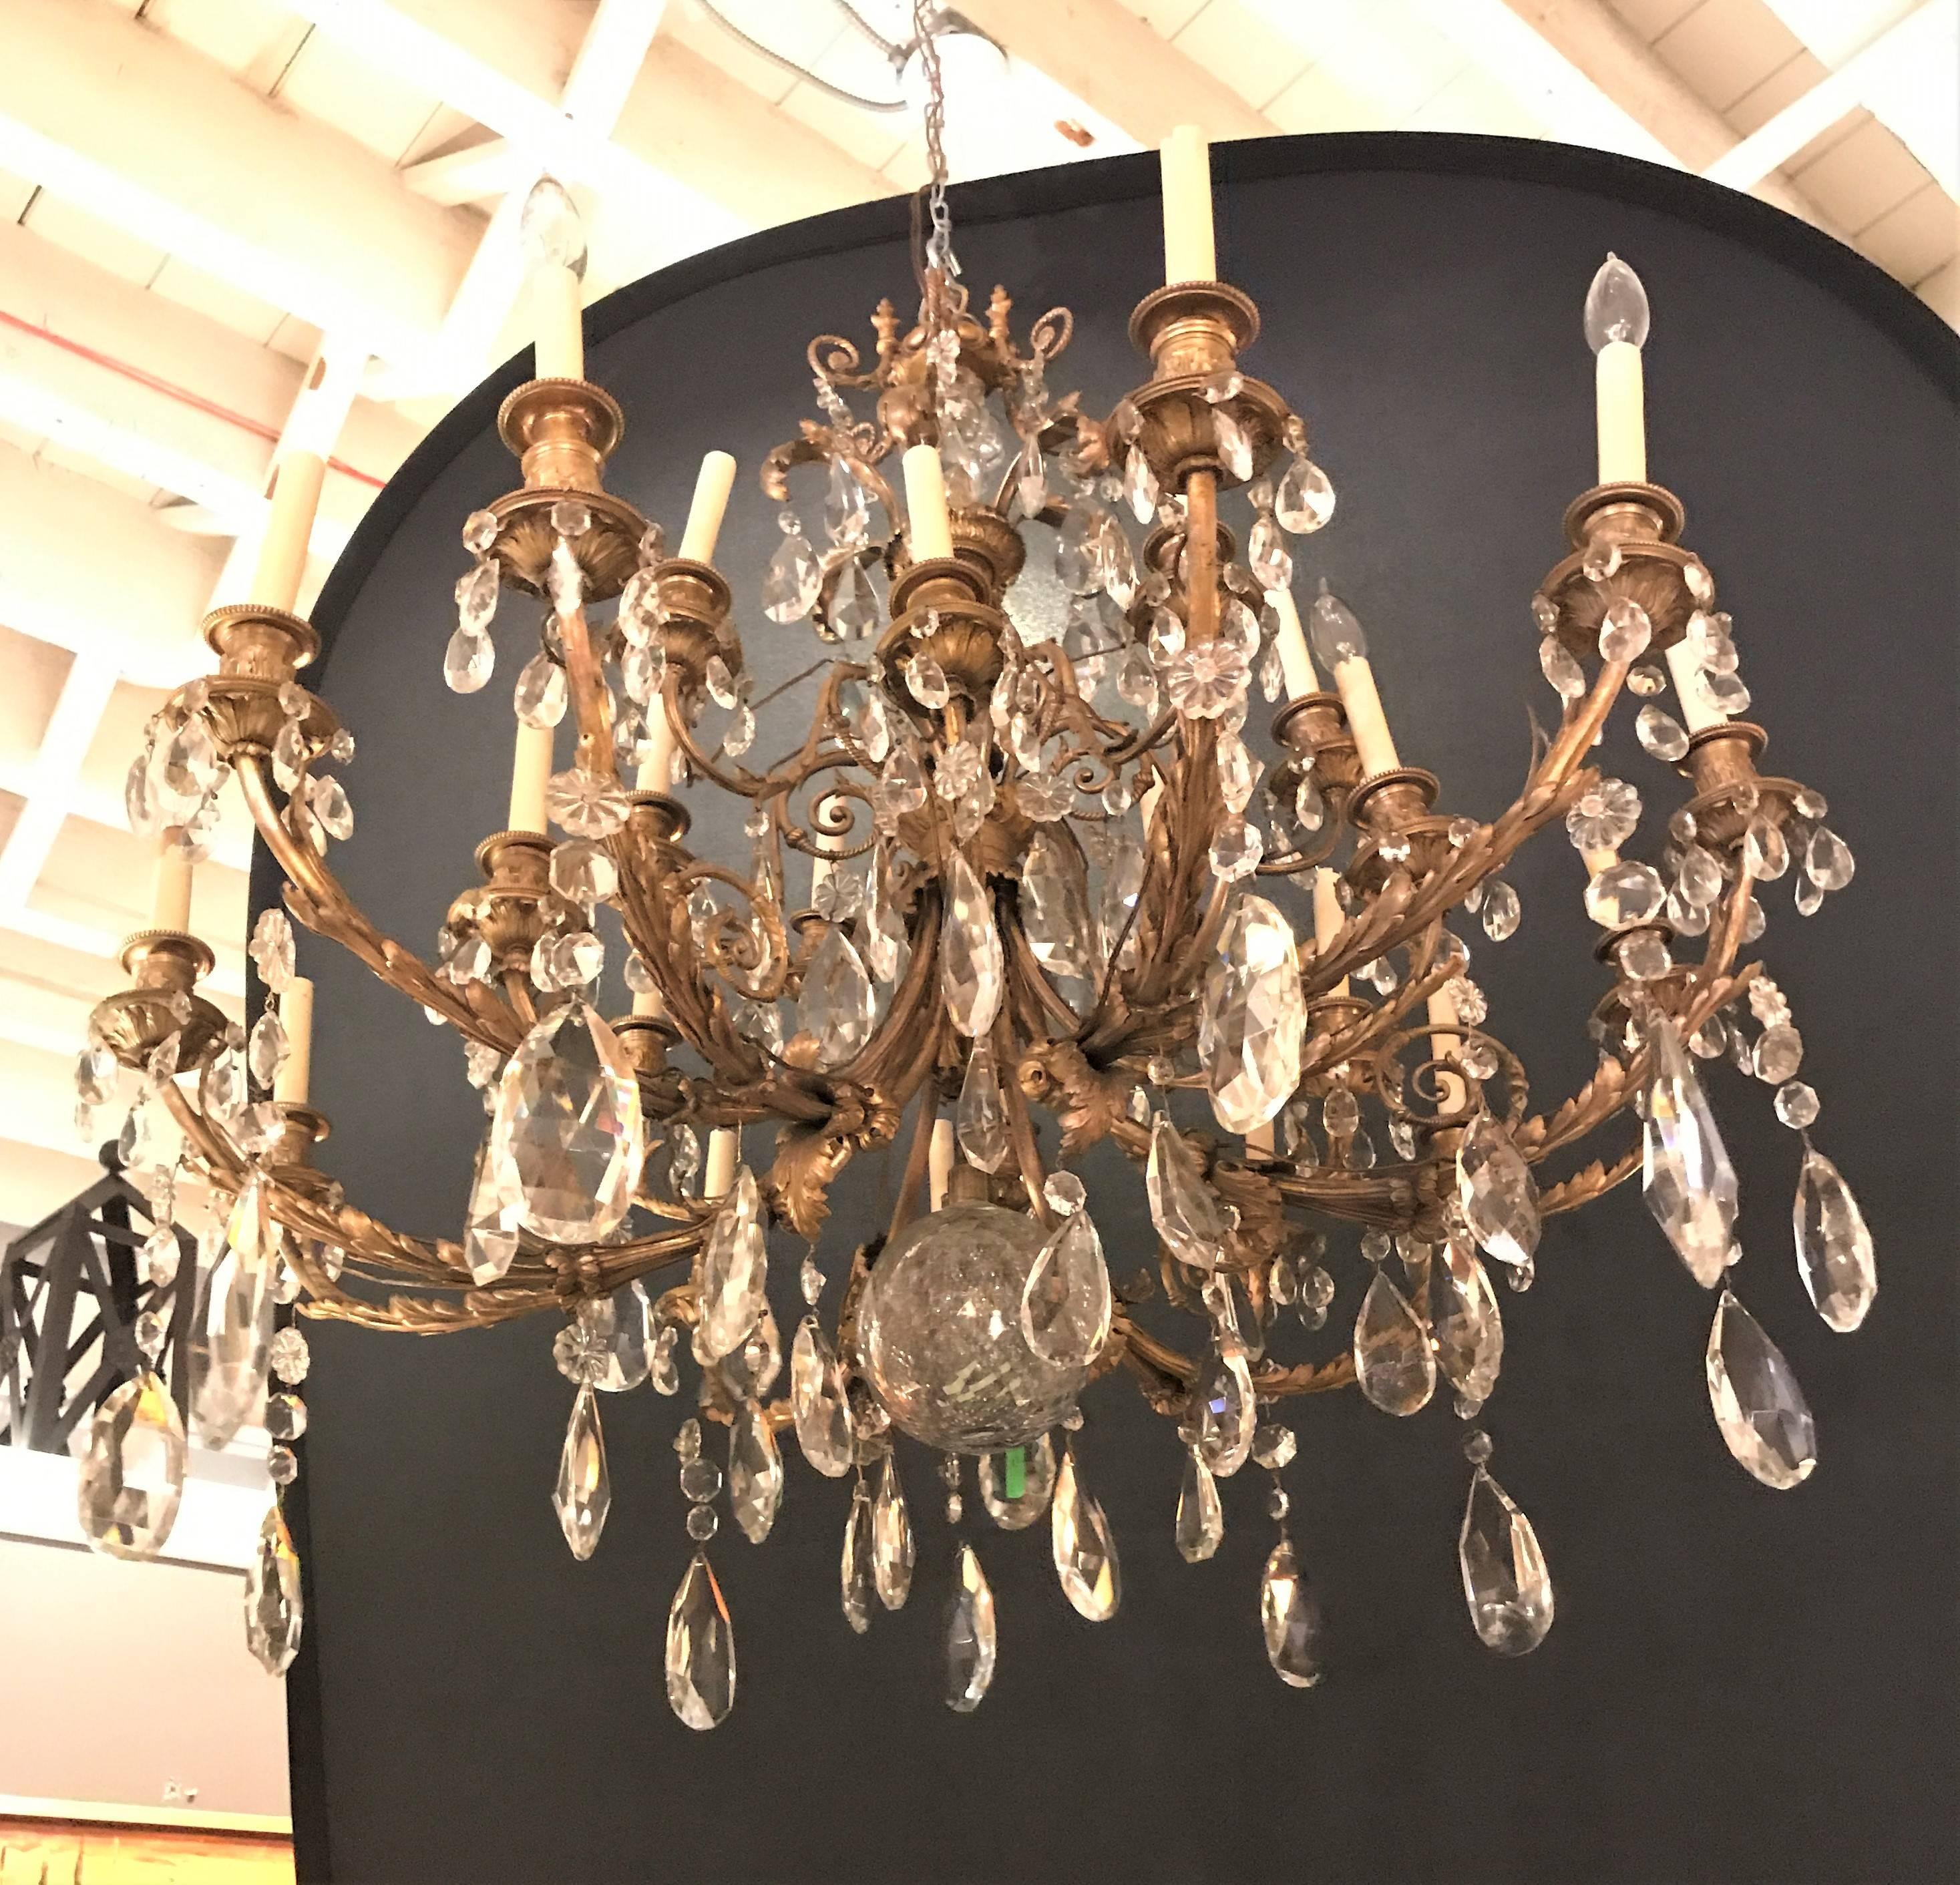 19th century French doré bronze and fine crystal chandelier. Prov: Doyle Galleries NY. This monumental bronze swag and scroll design chandelier has large and simply stunning crystals. The chandelier needs to be re-wired. This is an estate sale